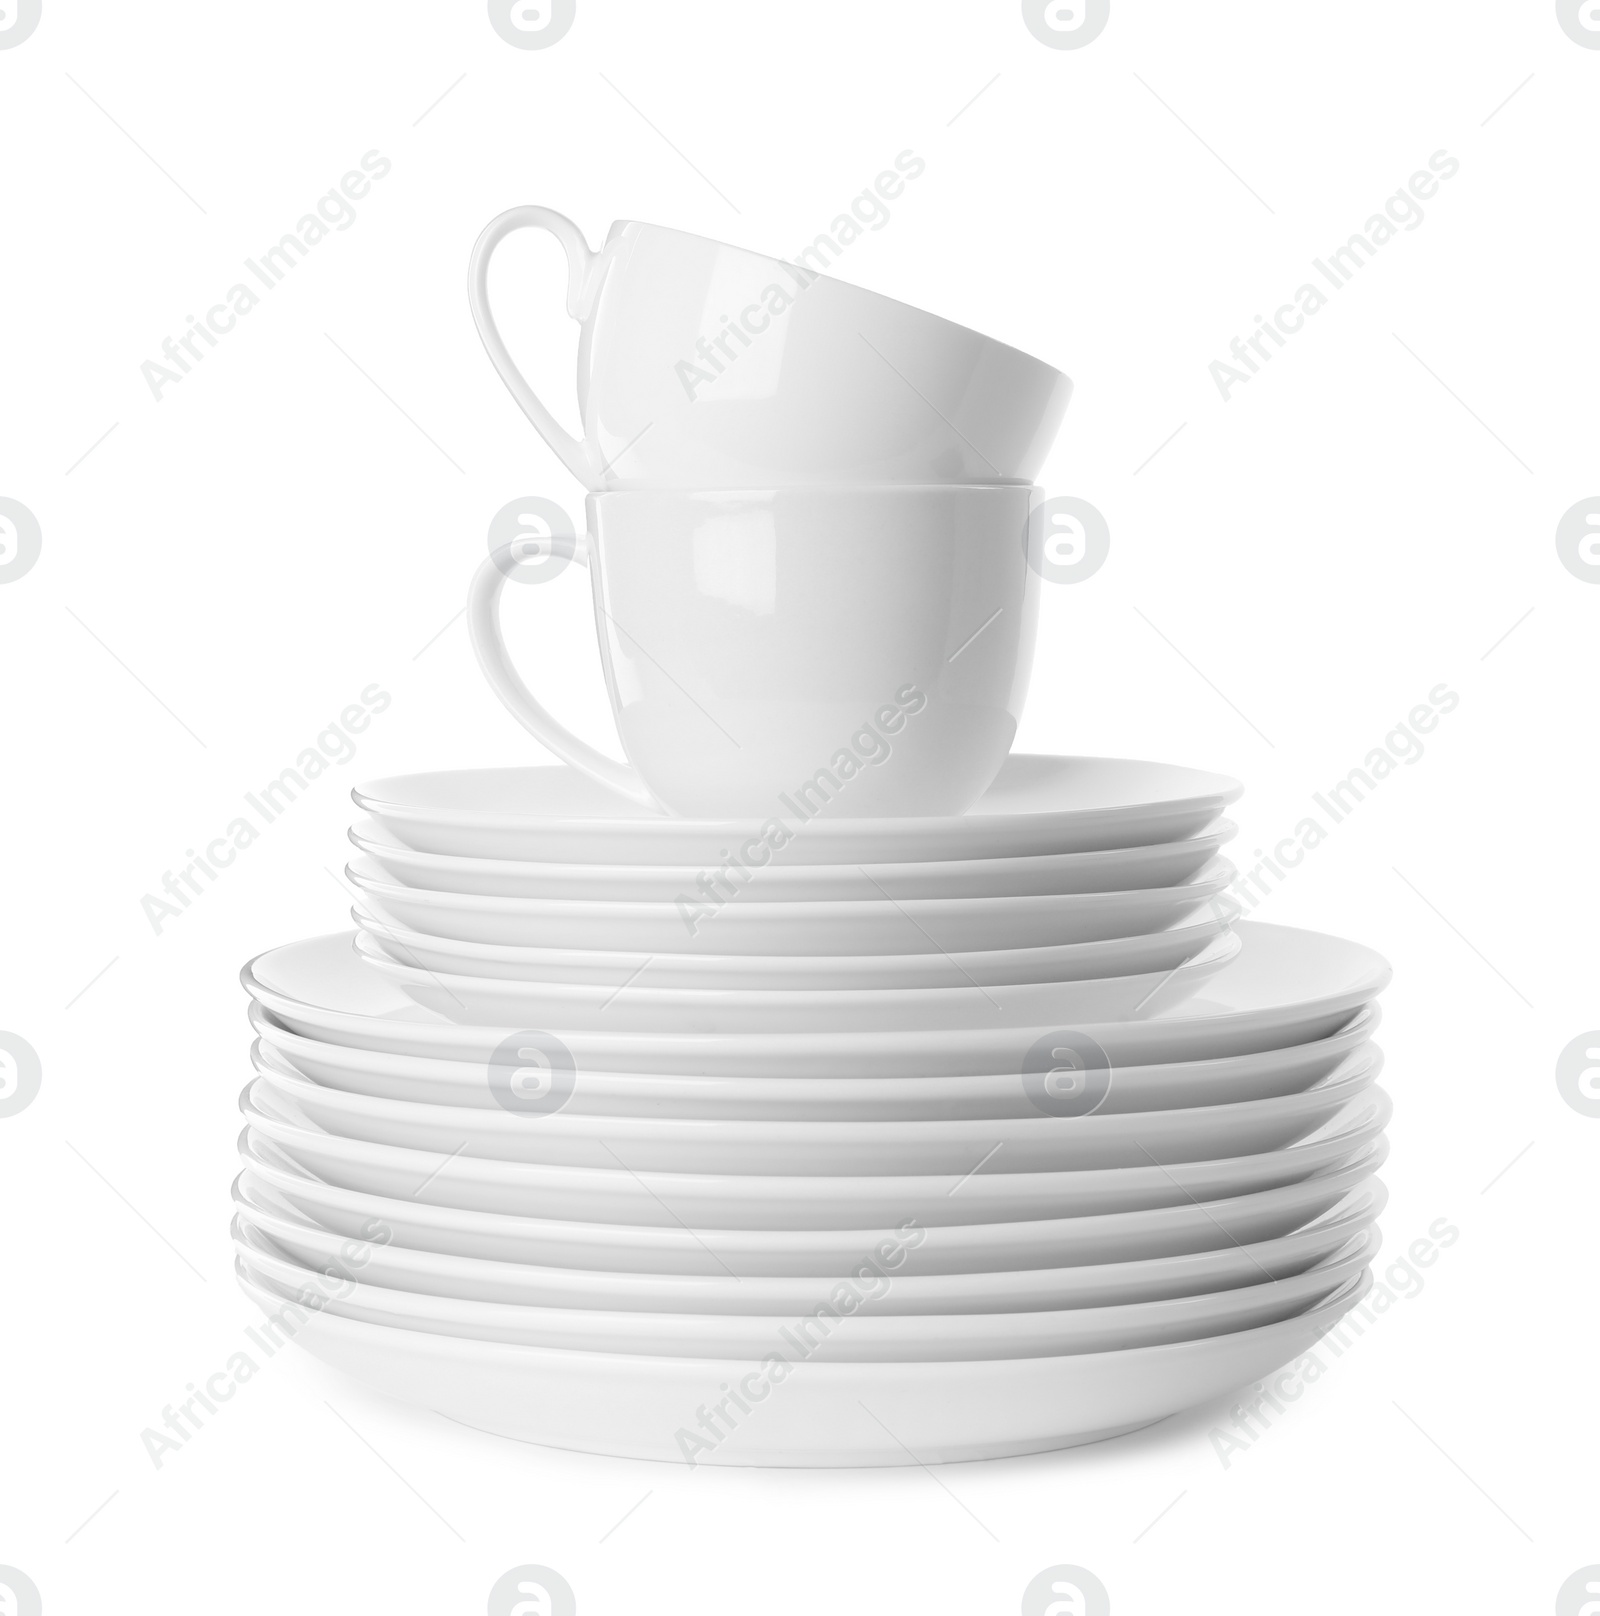 Photo of Set of clean tableware isolated on white